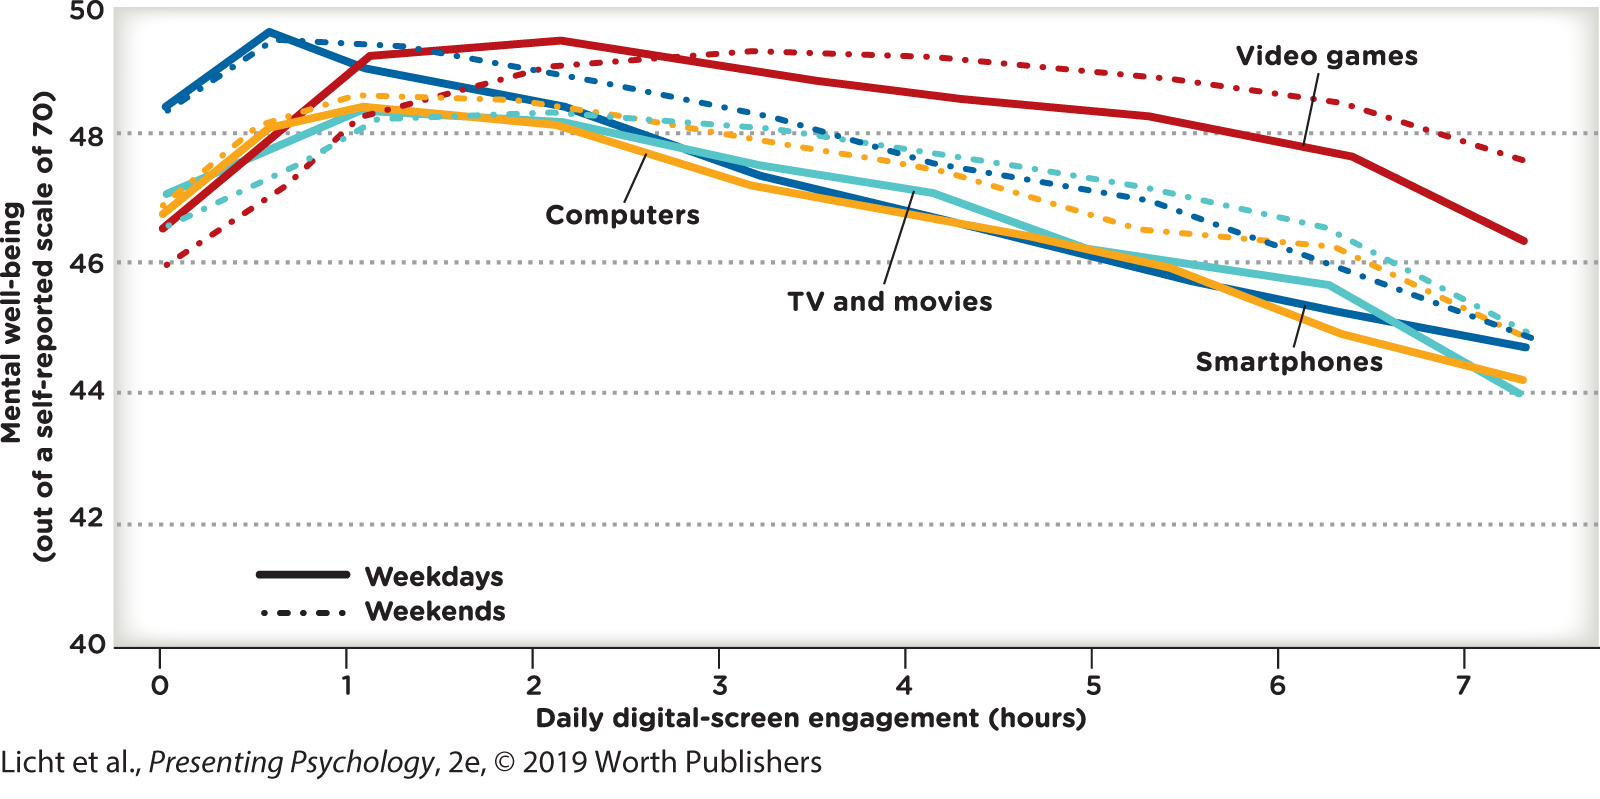 A graph plots several curves corresponding to teens’ daily digital-screen engagement in hours for weekdays and weekends. The vertical axis shows the mental wellbeing between 40 and 50. The data are as follows. You can read full description from the link below.